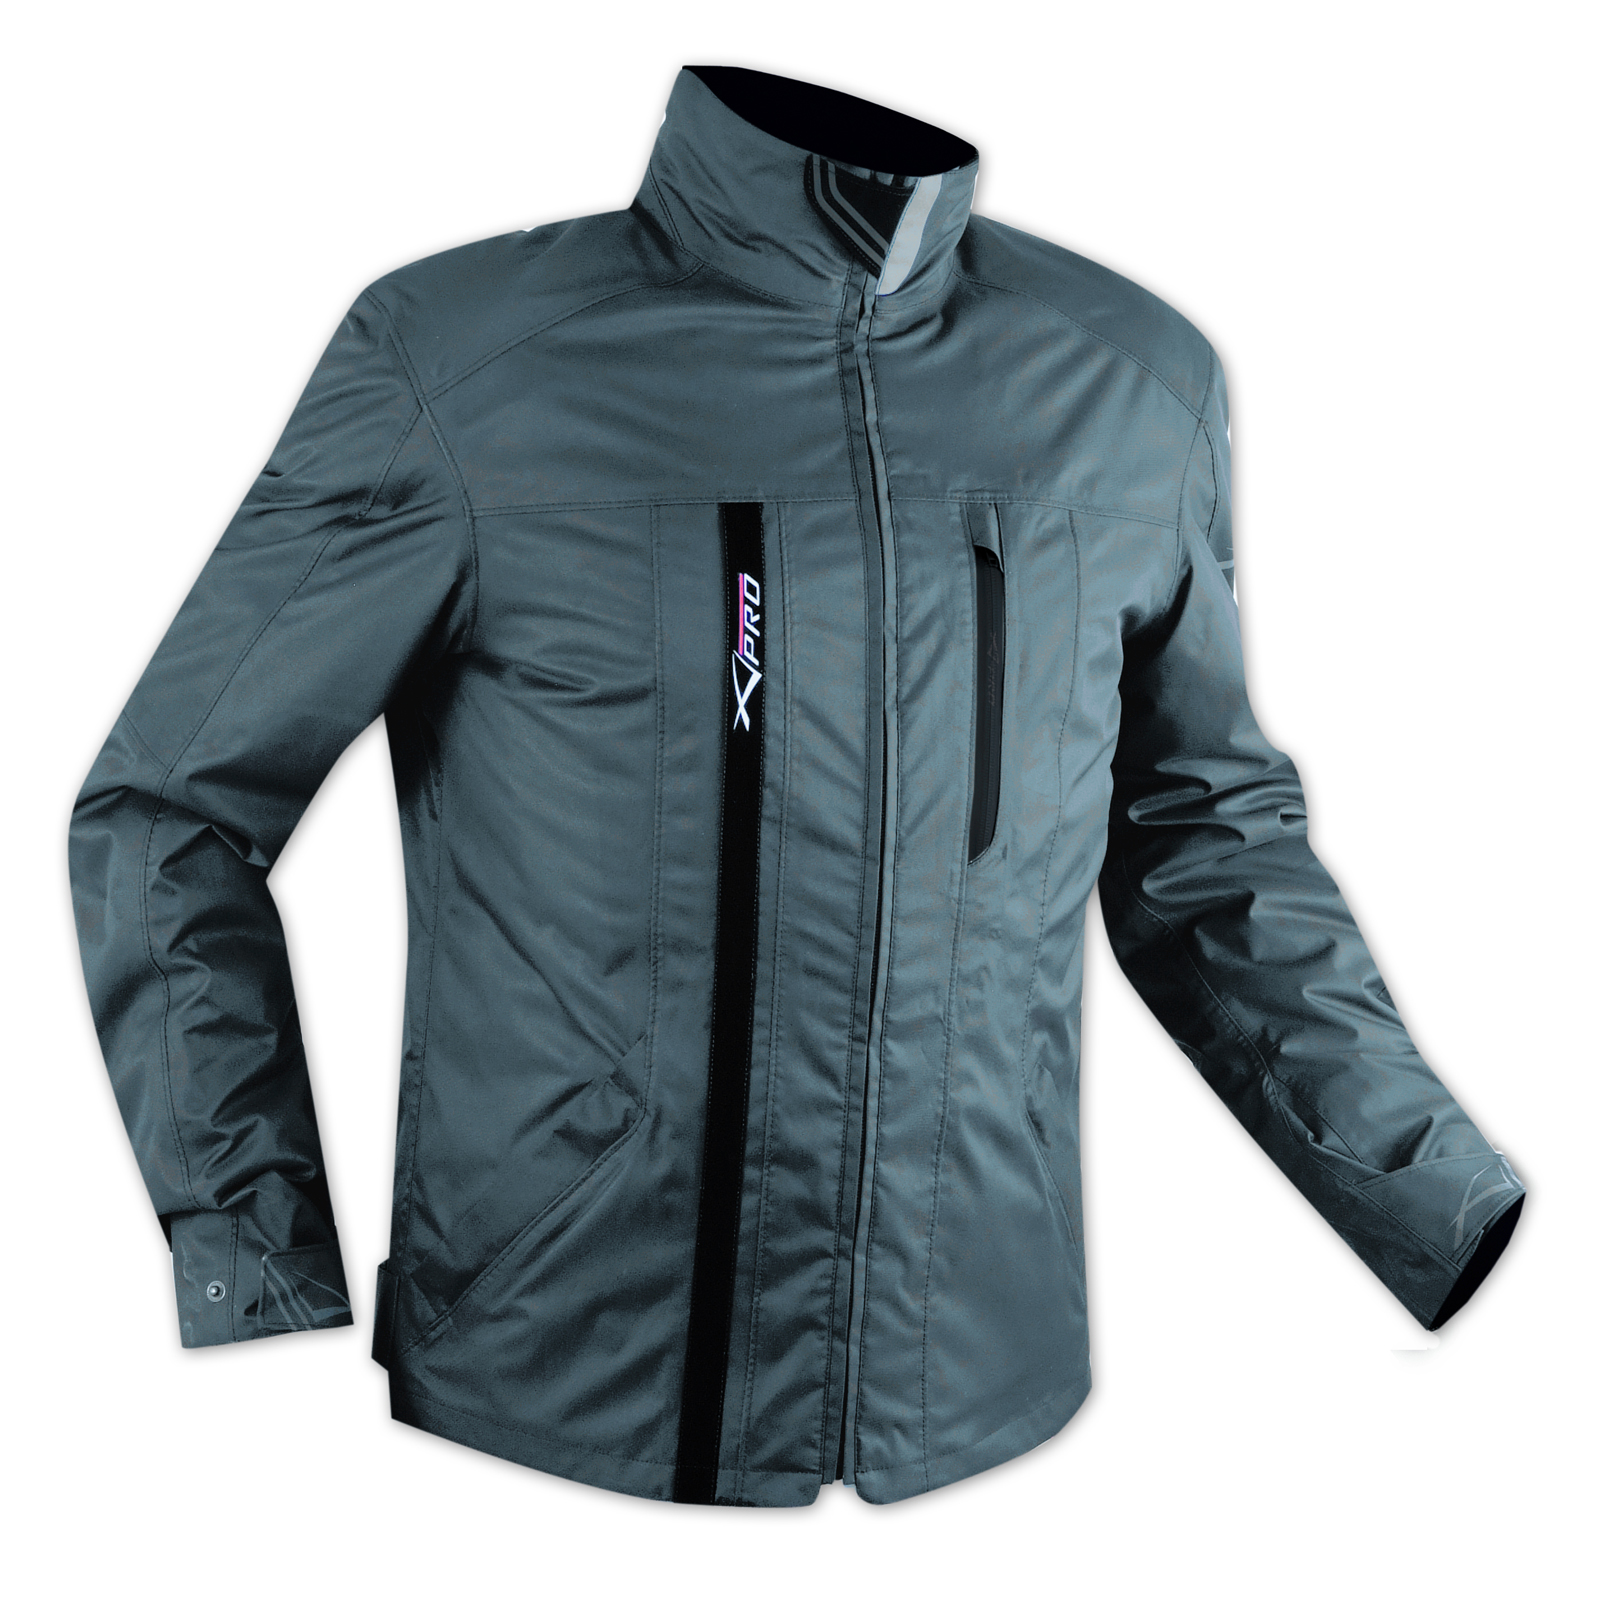 thermal liner jacket motorcycle A-pro ladies textile waterproof CE armour